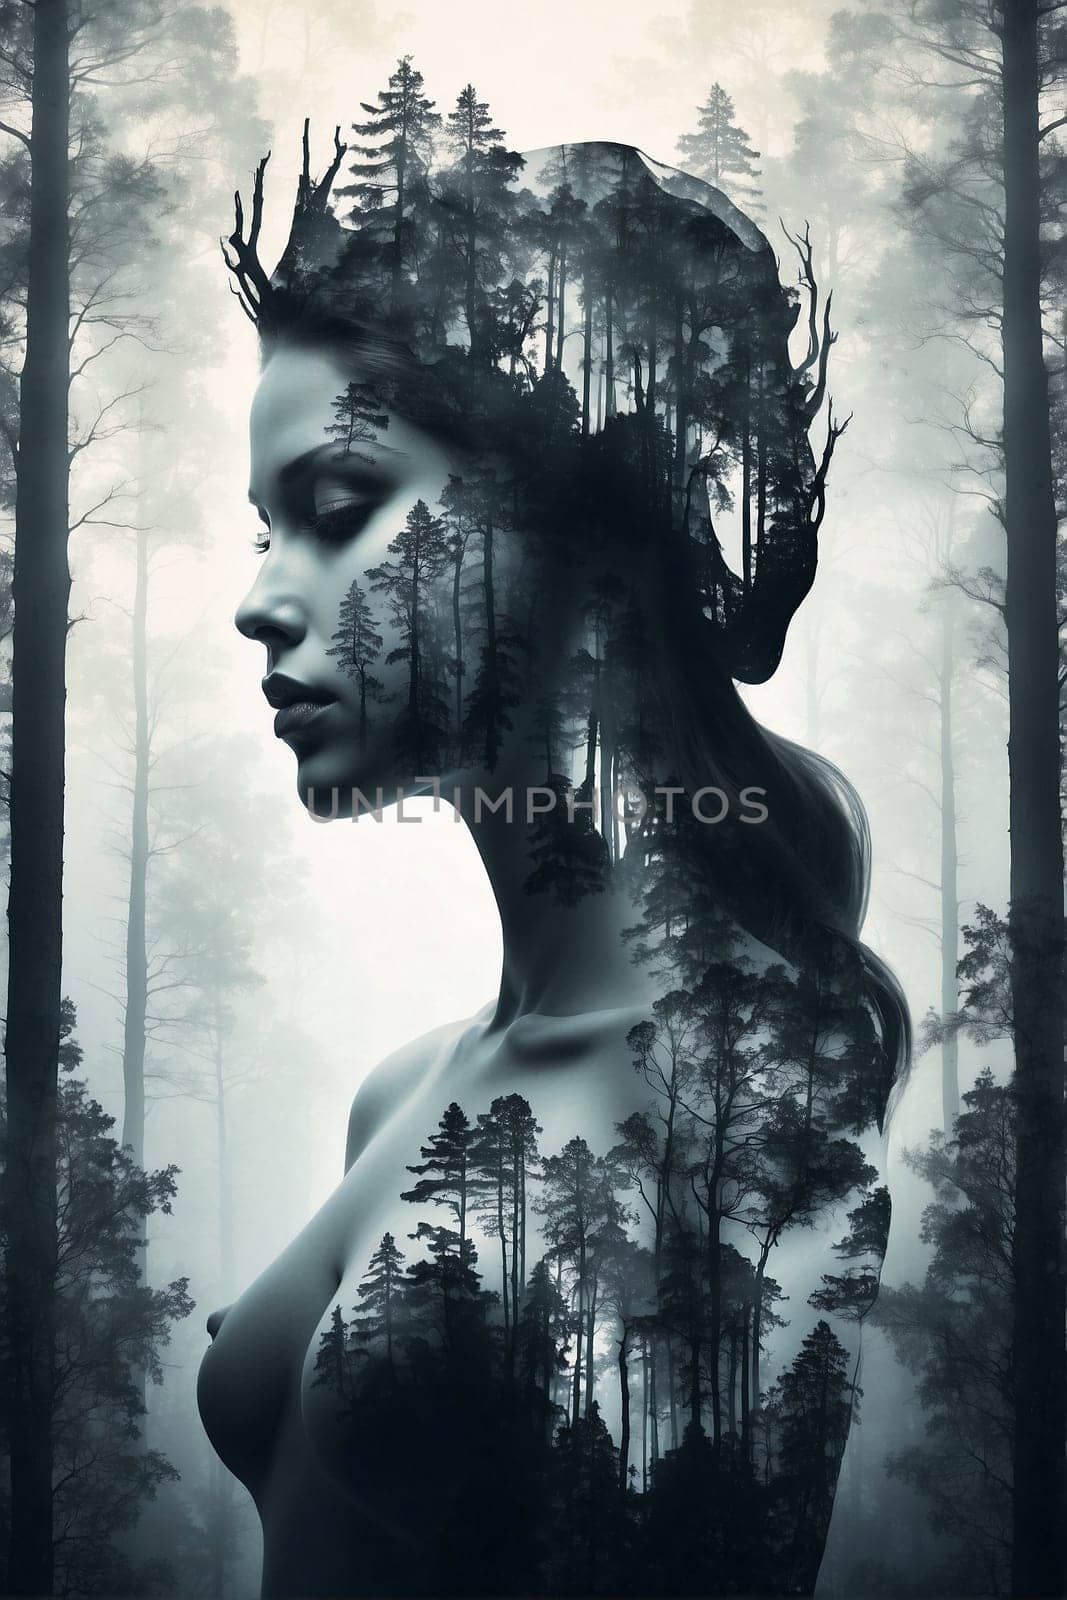 A tranquil portrait of a womans face framed by the majestic beauty of the surrounding trees.